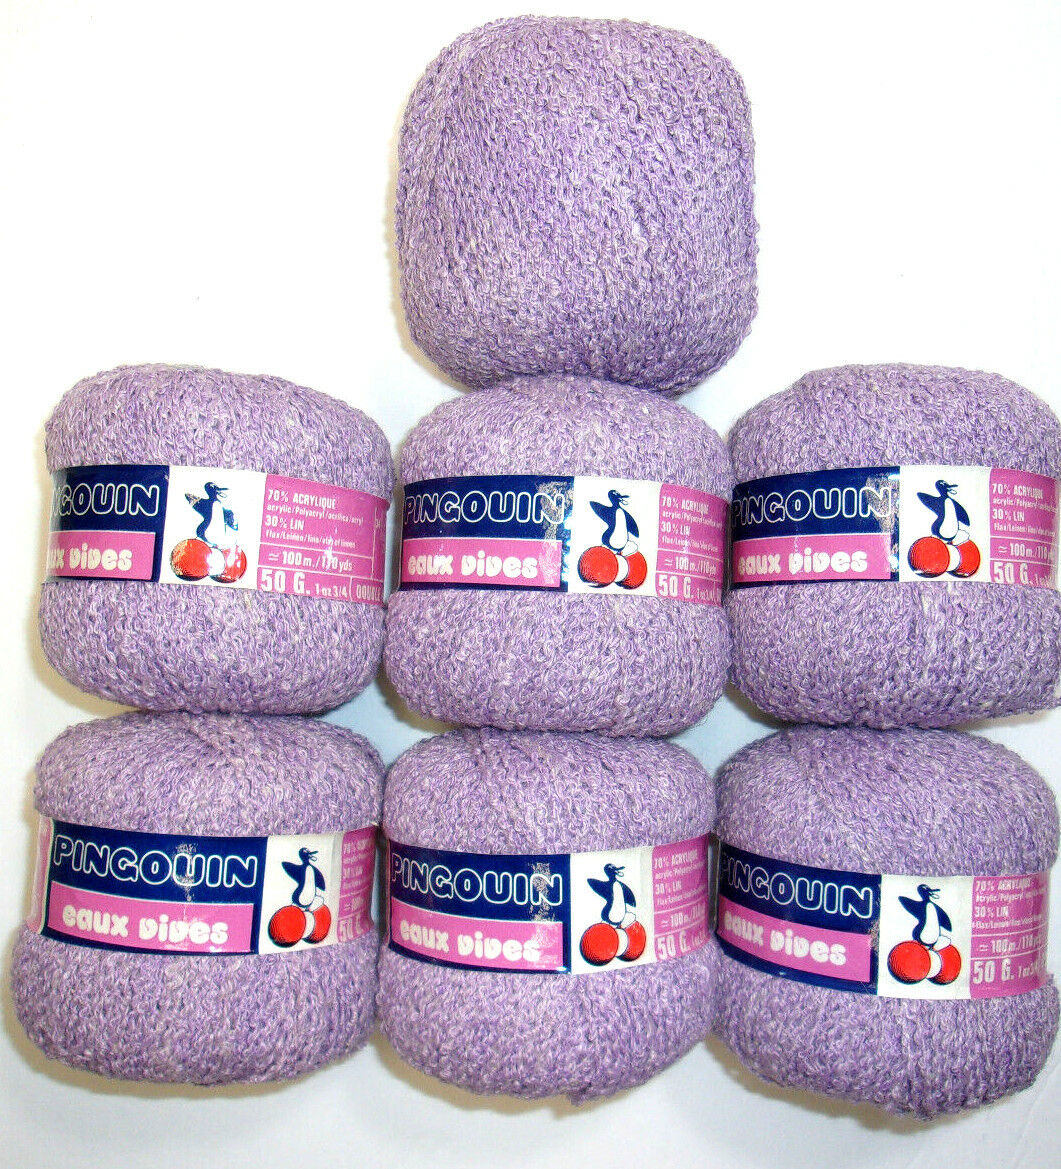 Lot of 7 ~ Vintage Pingouin Double Knitting Yarn, Lilac, 1.75 oz, Made in France Pingouin